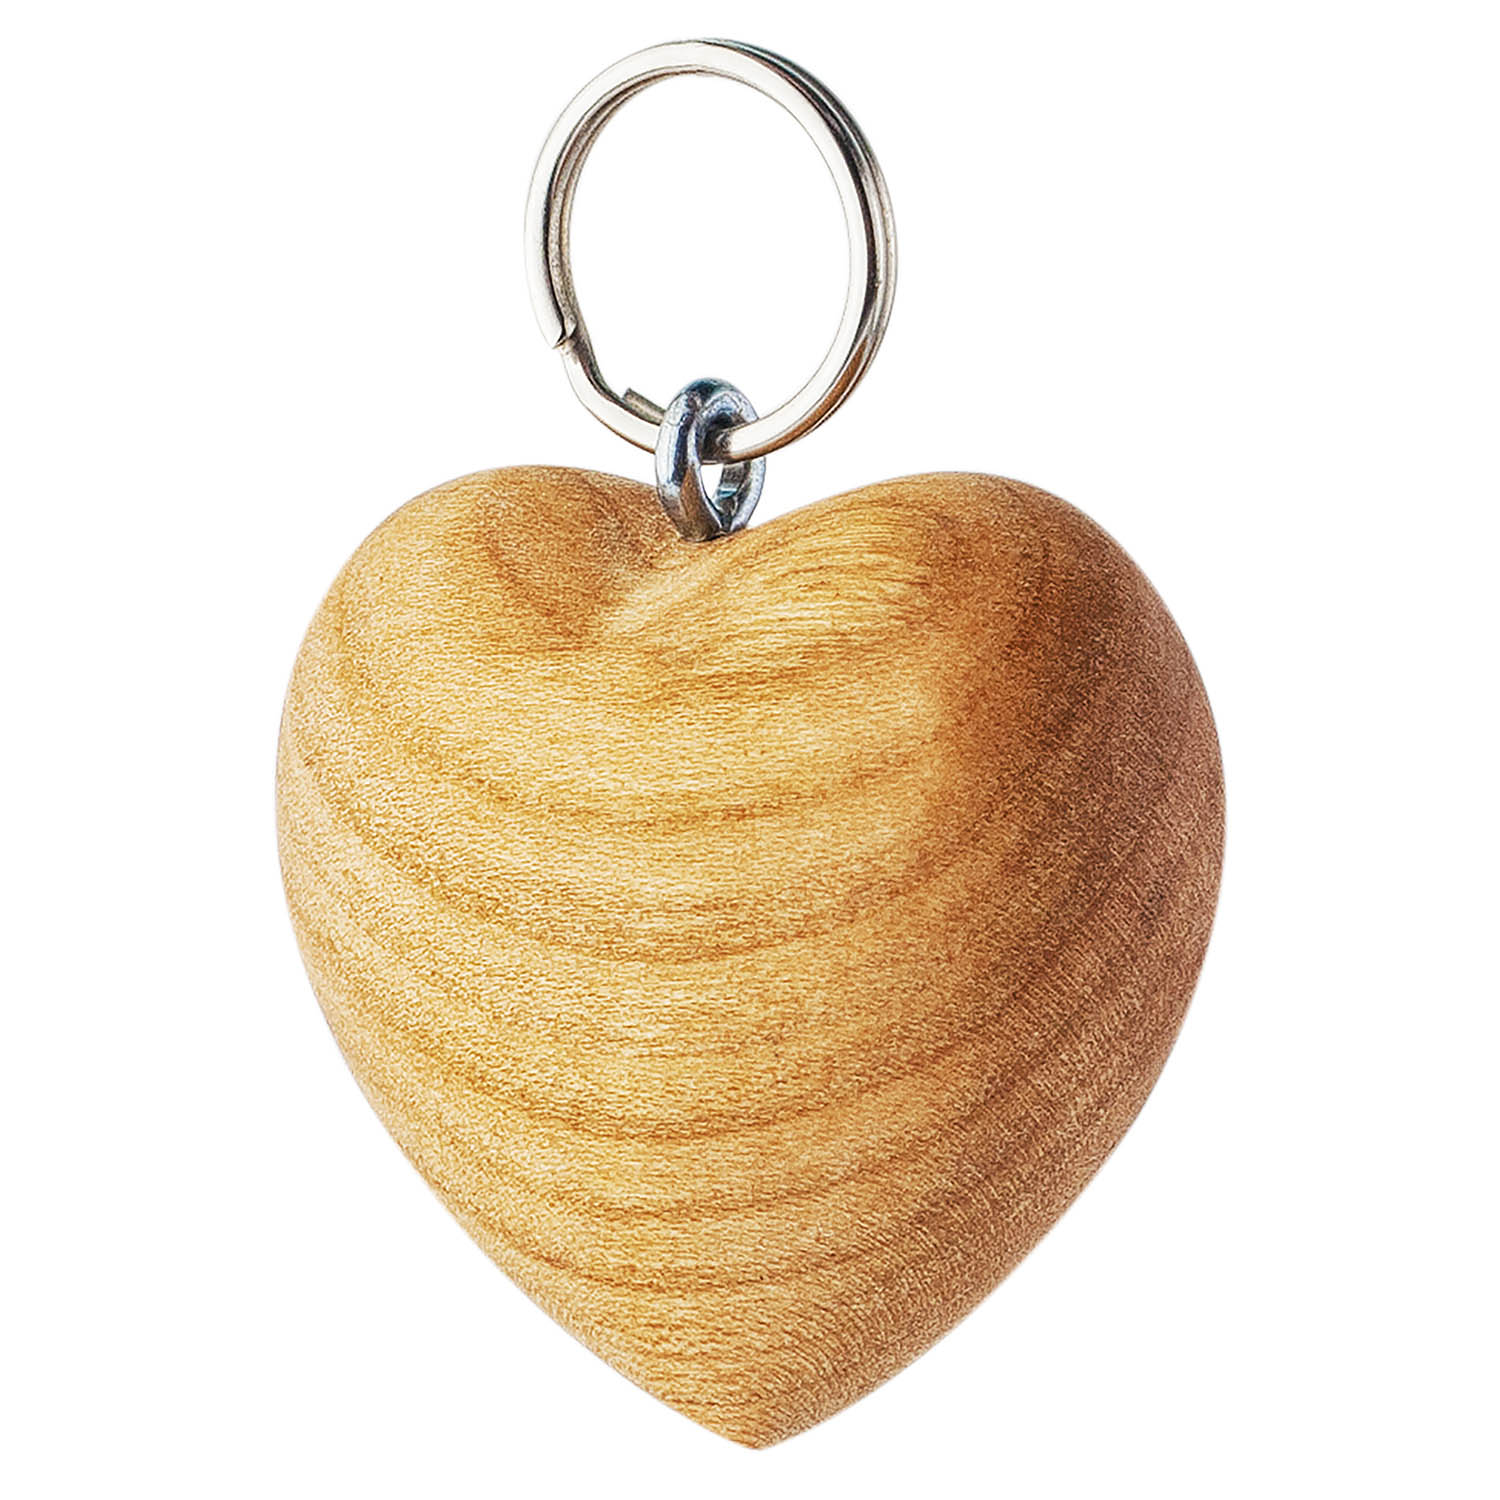 Wooden Heart Shaped Keychains